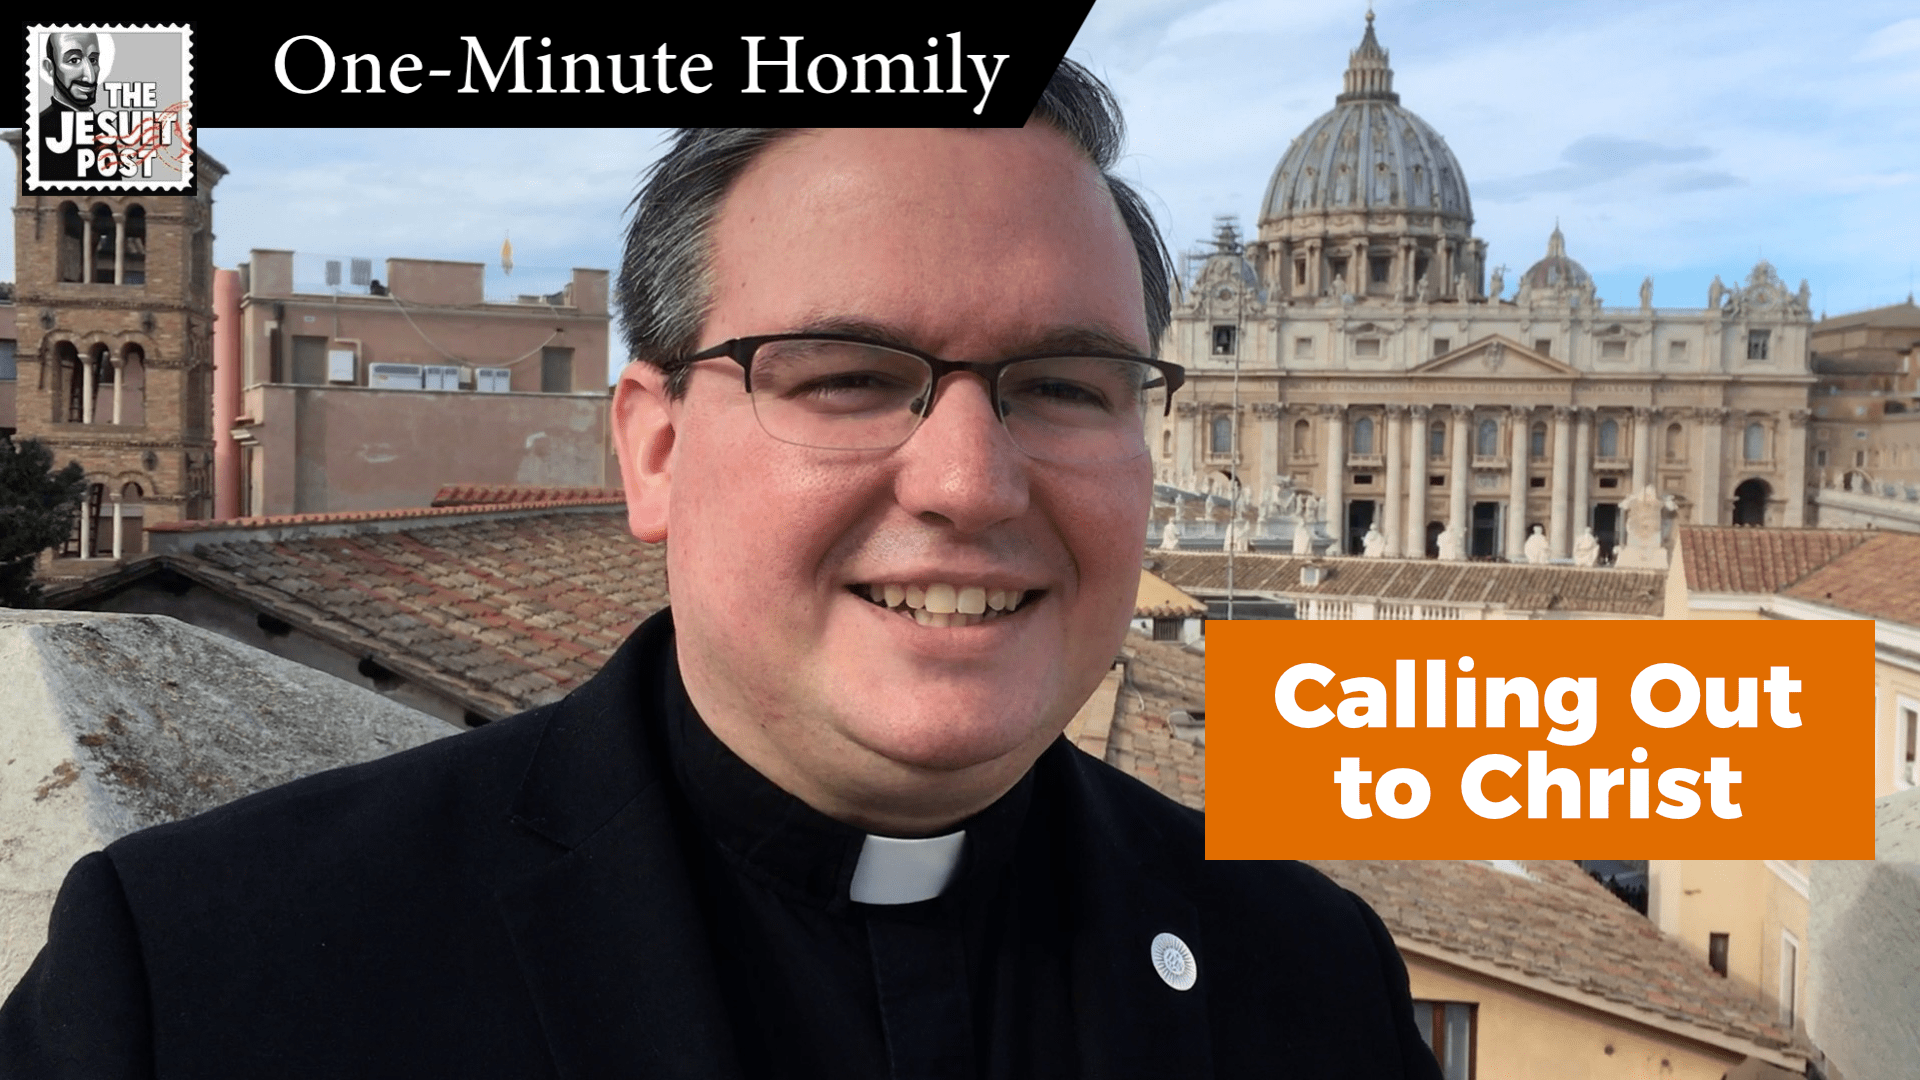 One-Minute Homily: “Calling Out to Christ”